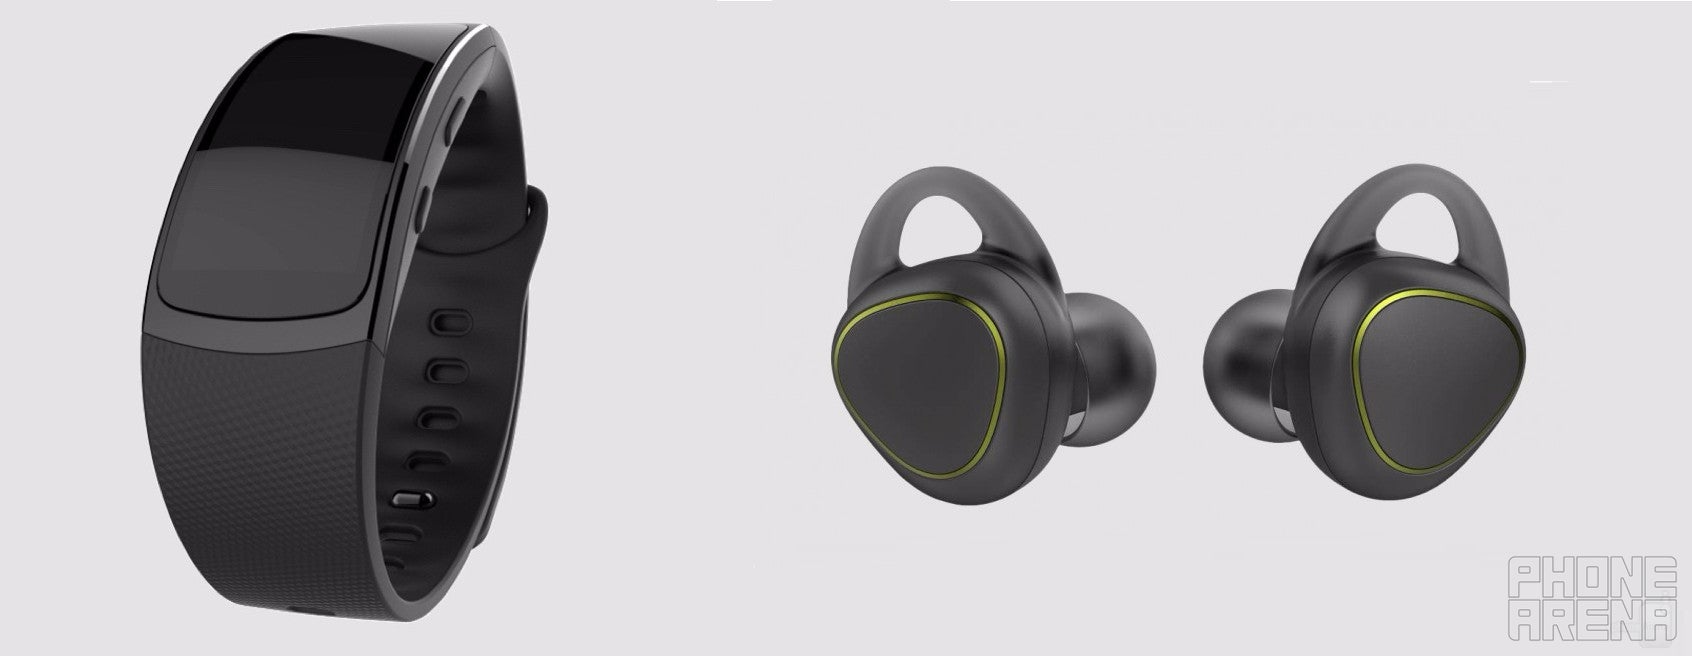 Samsung accidentally showcases new fitness band and Bluetooth earbuds